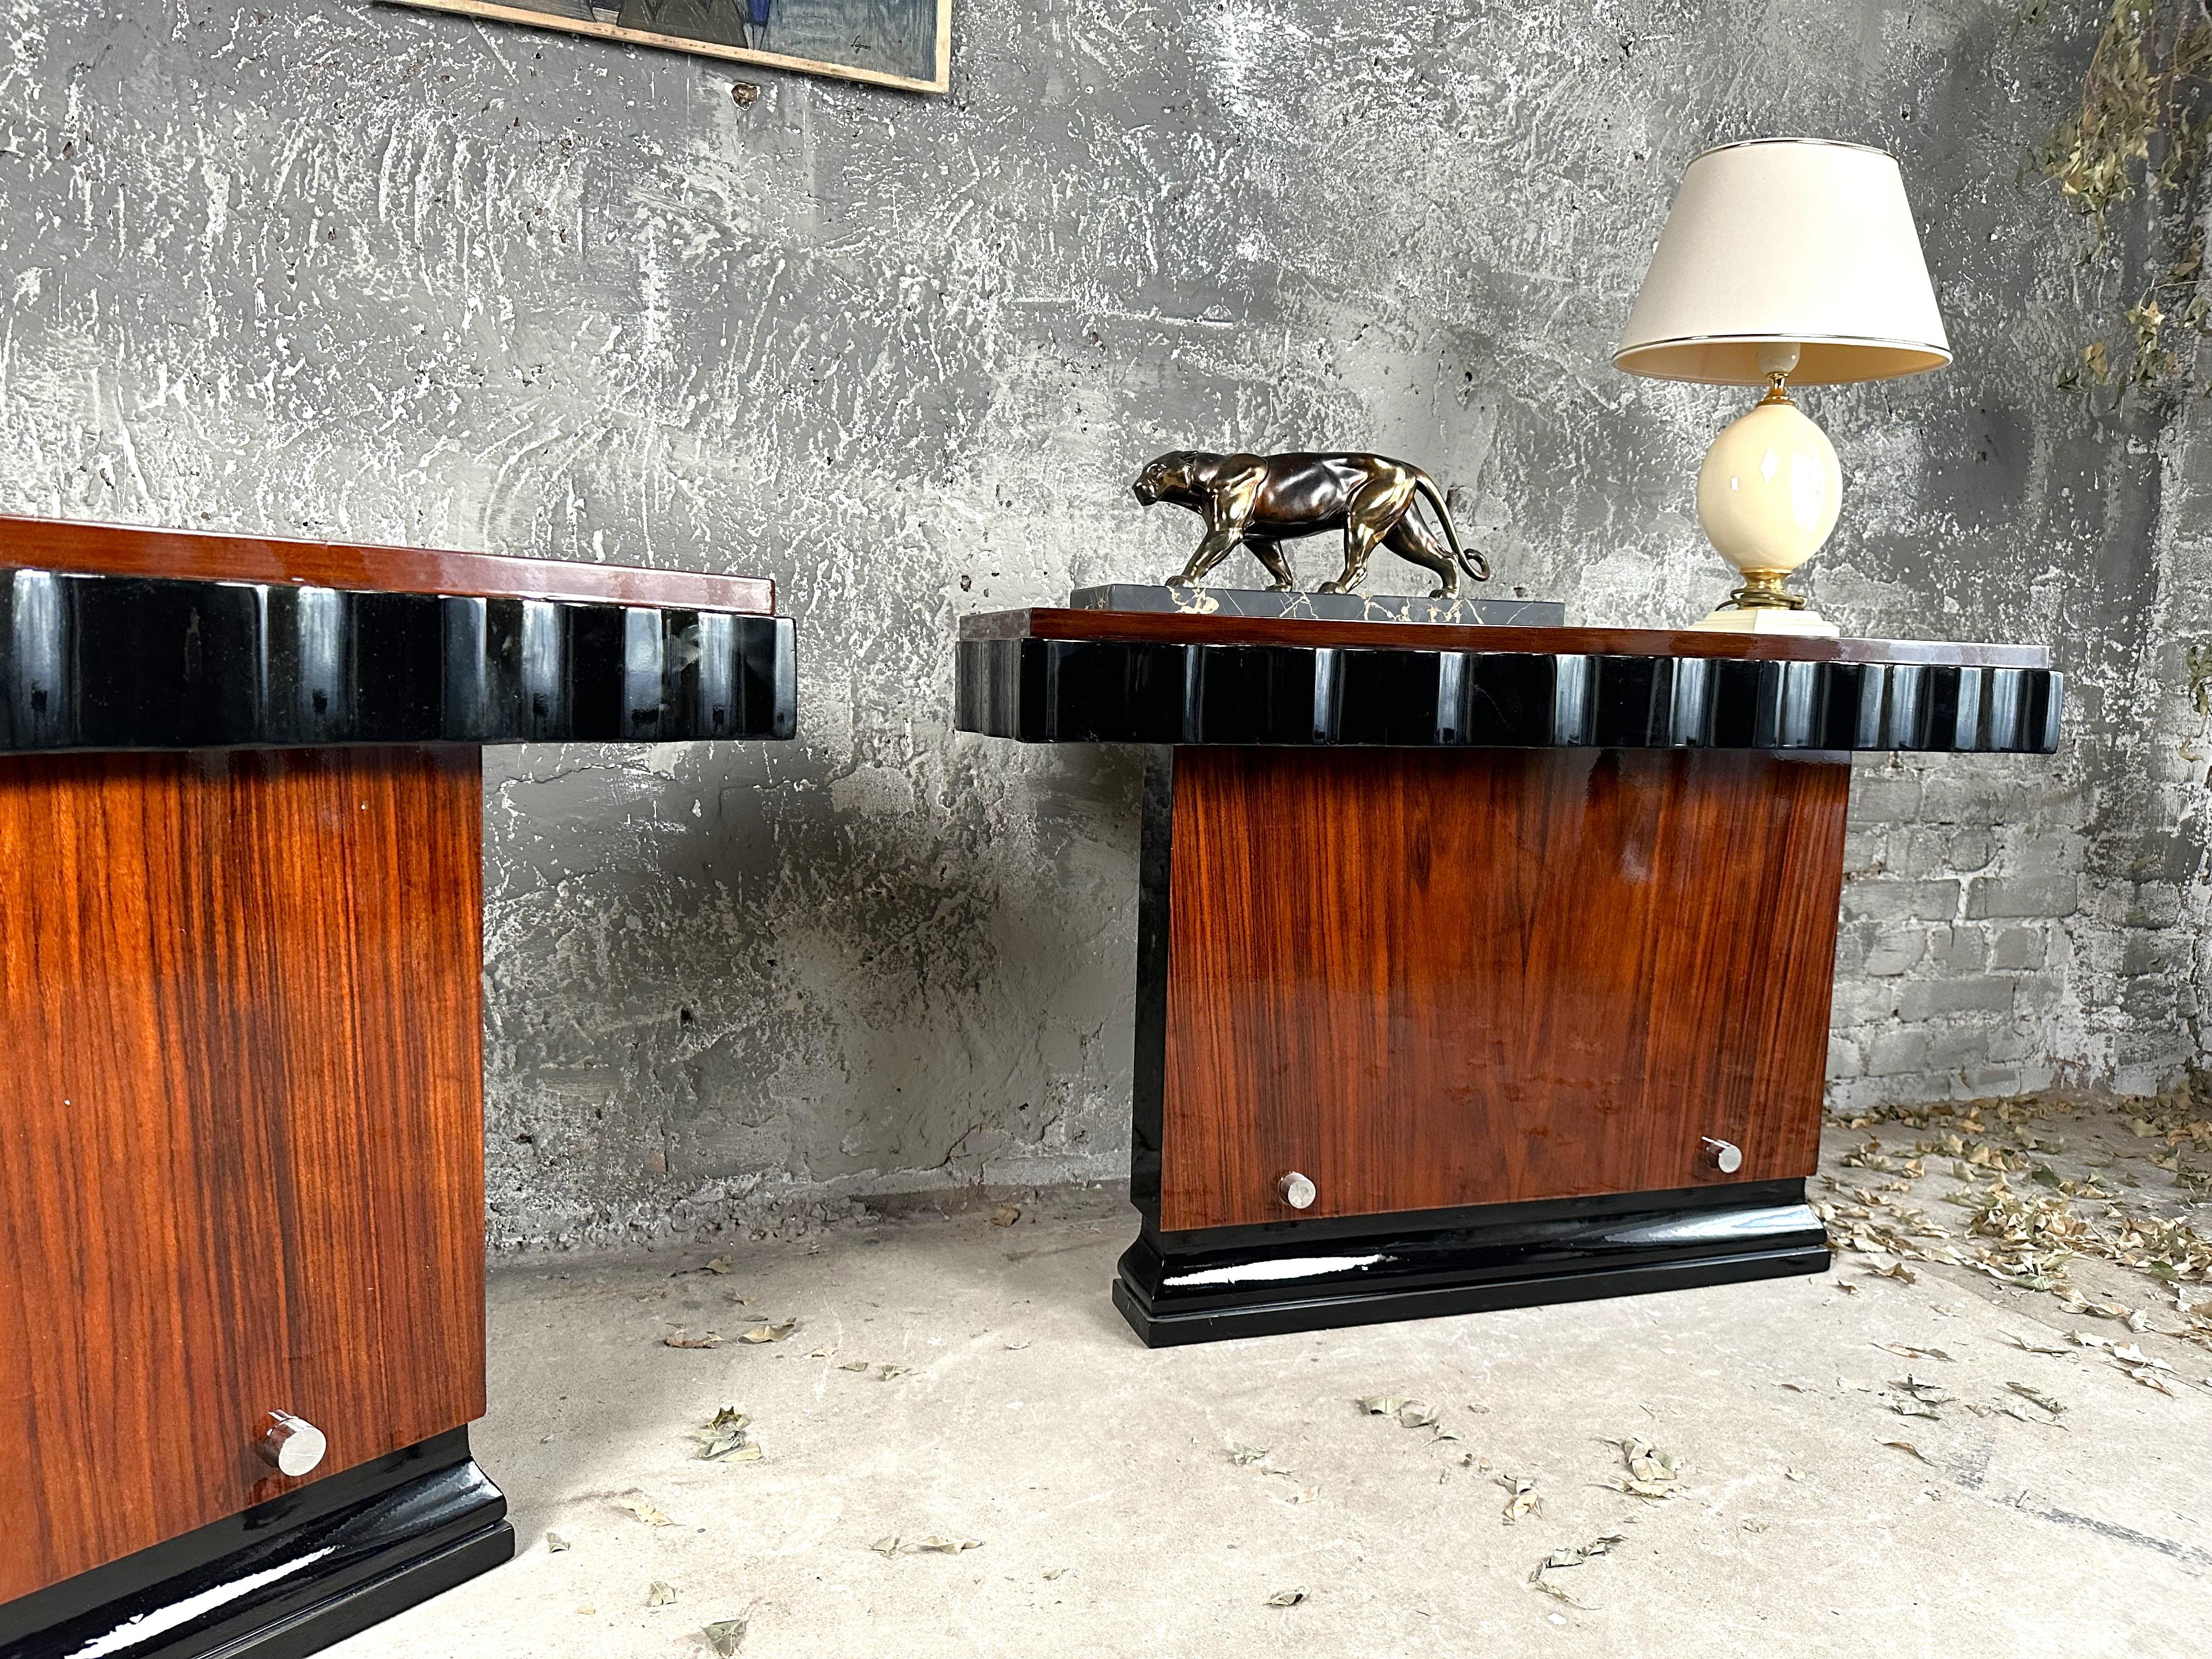 Chrome Art Deco Modernist Pair of Console Tables by Kristian Krass, France 1935 For Sale